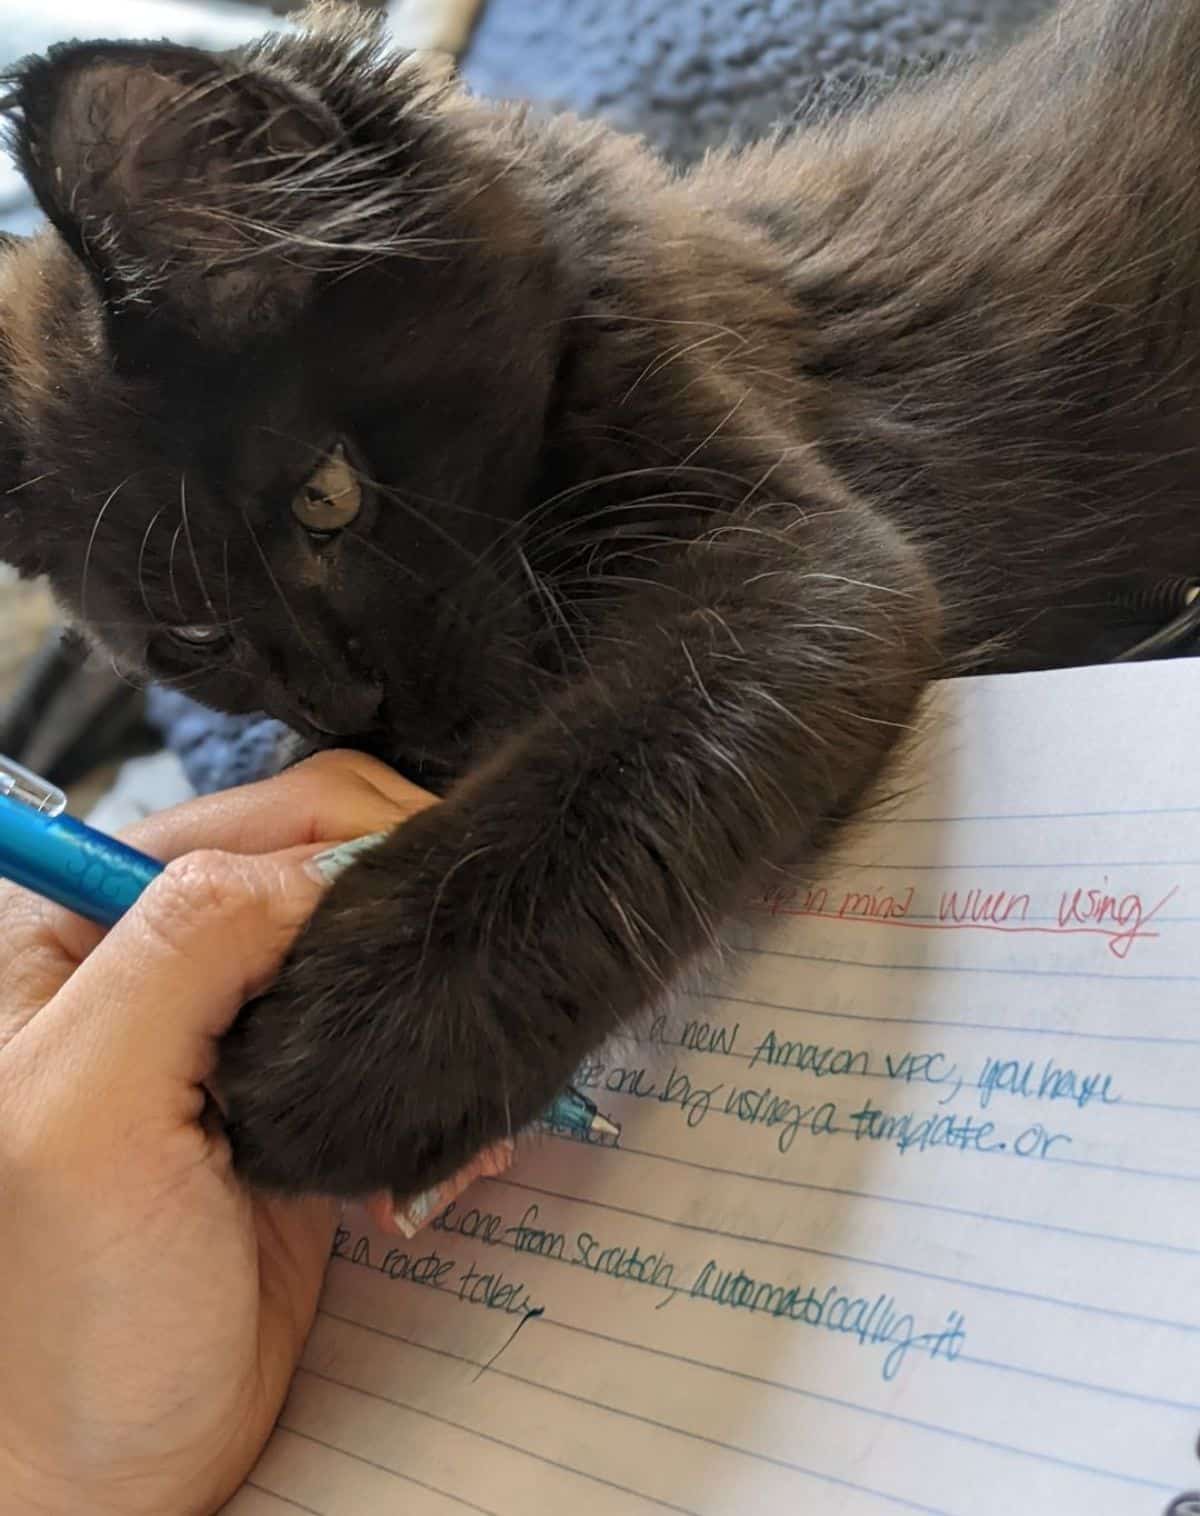 An adorable black maine coon kitten playing with a human hand holding a pen.